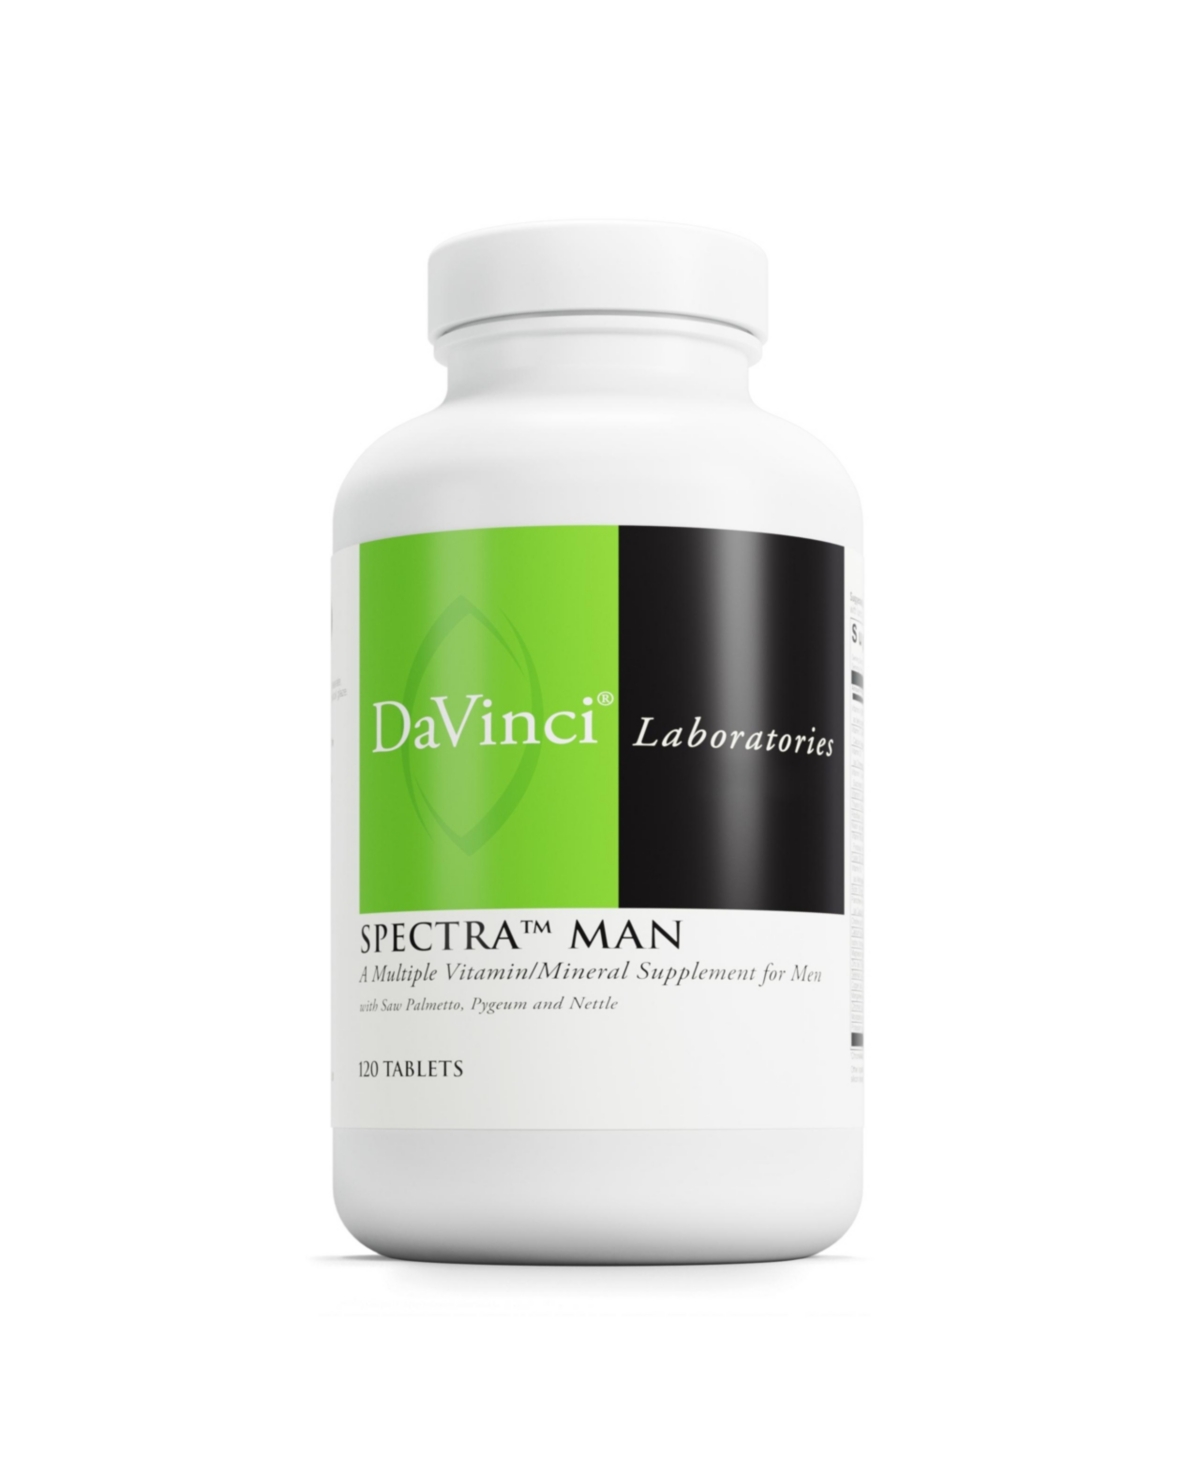 DaVinci Labs Spectra Man - Dietary Supplement to Support Immune System Function and Men's Unique Needs - With Vitamins, Minerals, Amino Acids, Herbs,